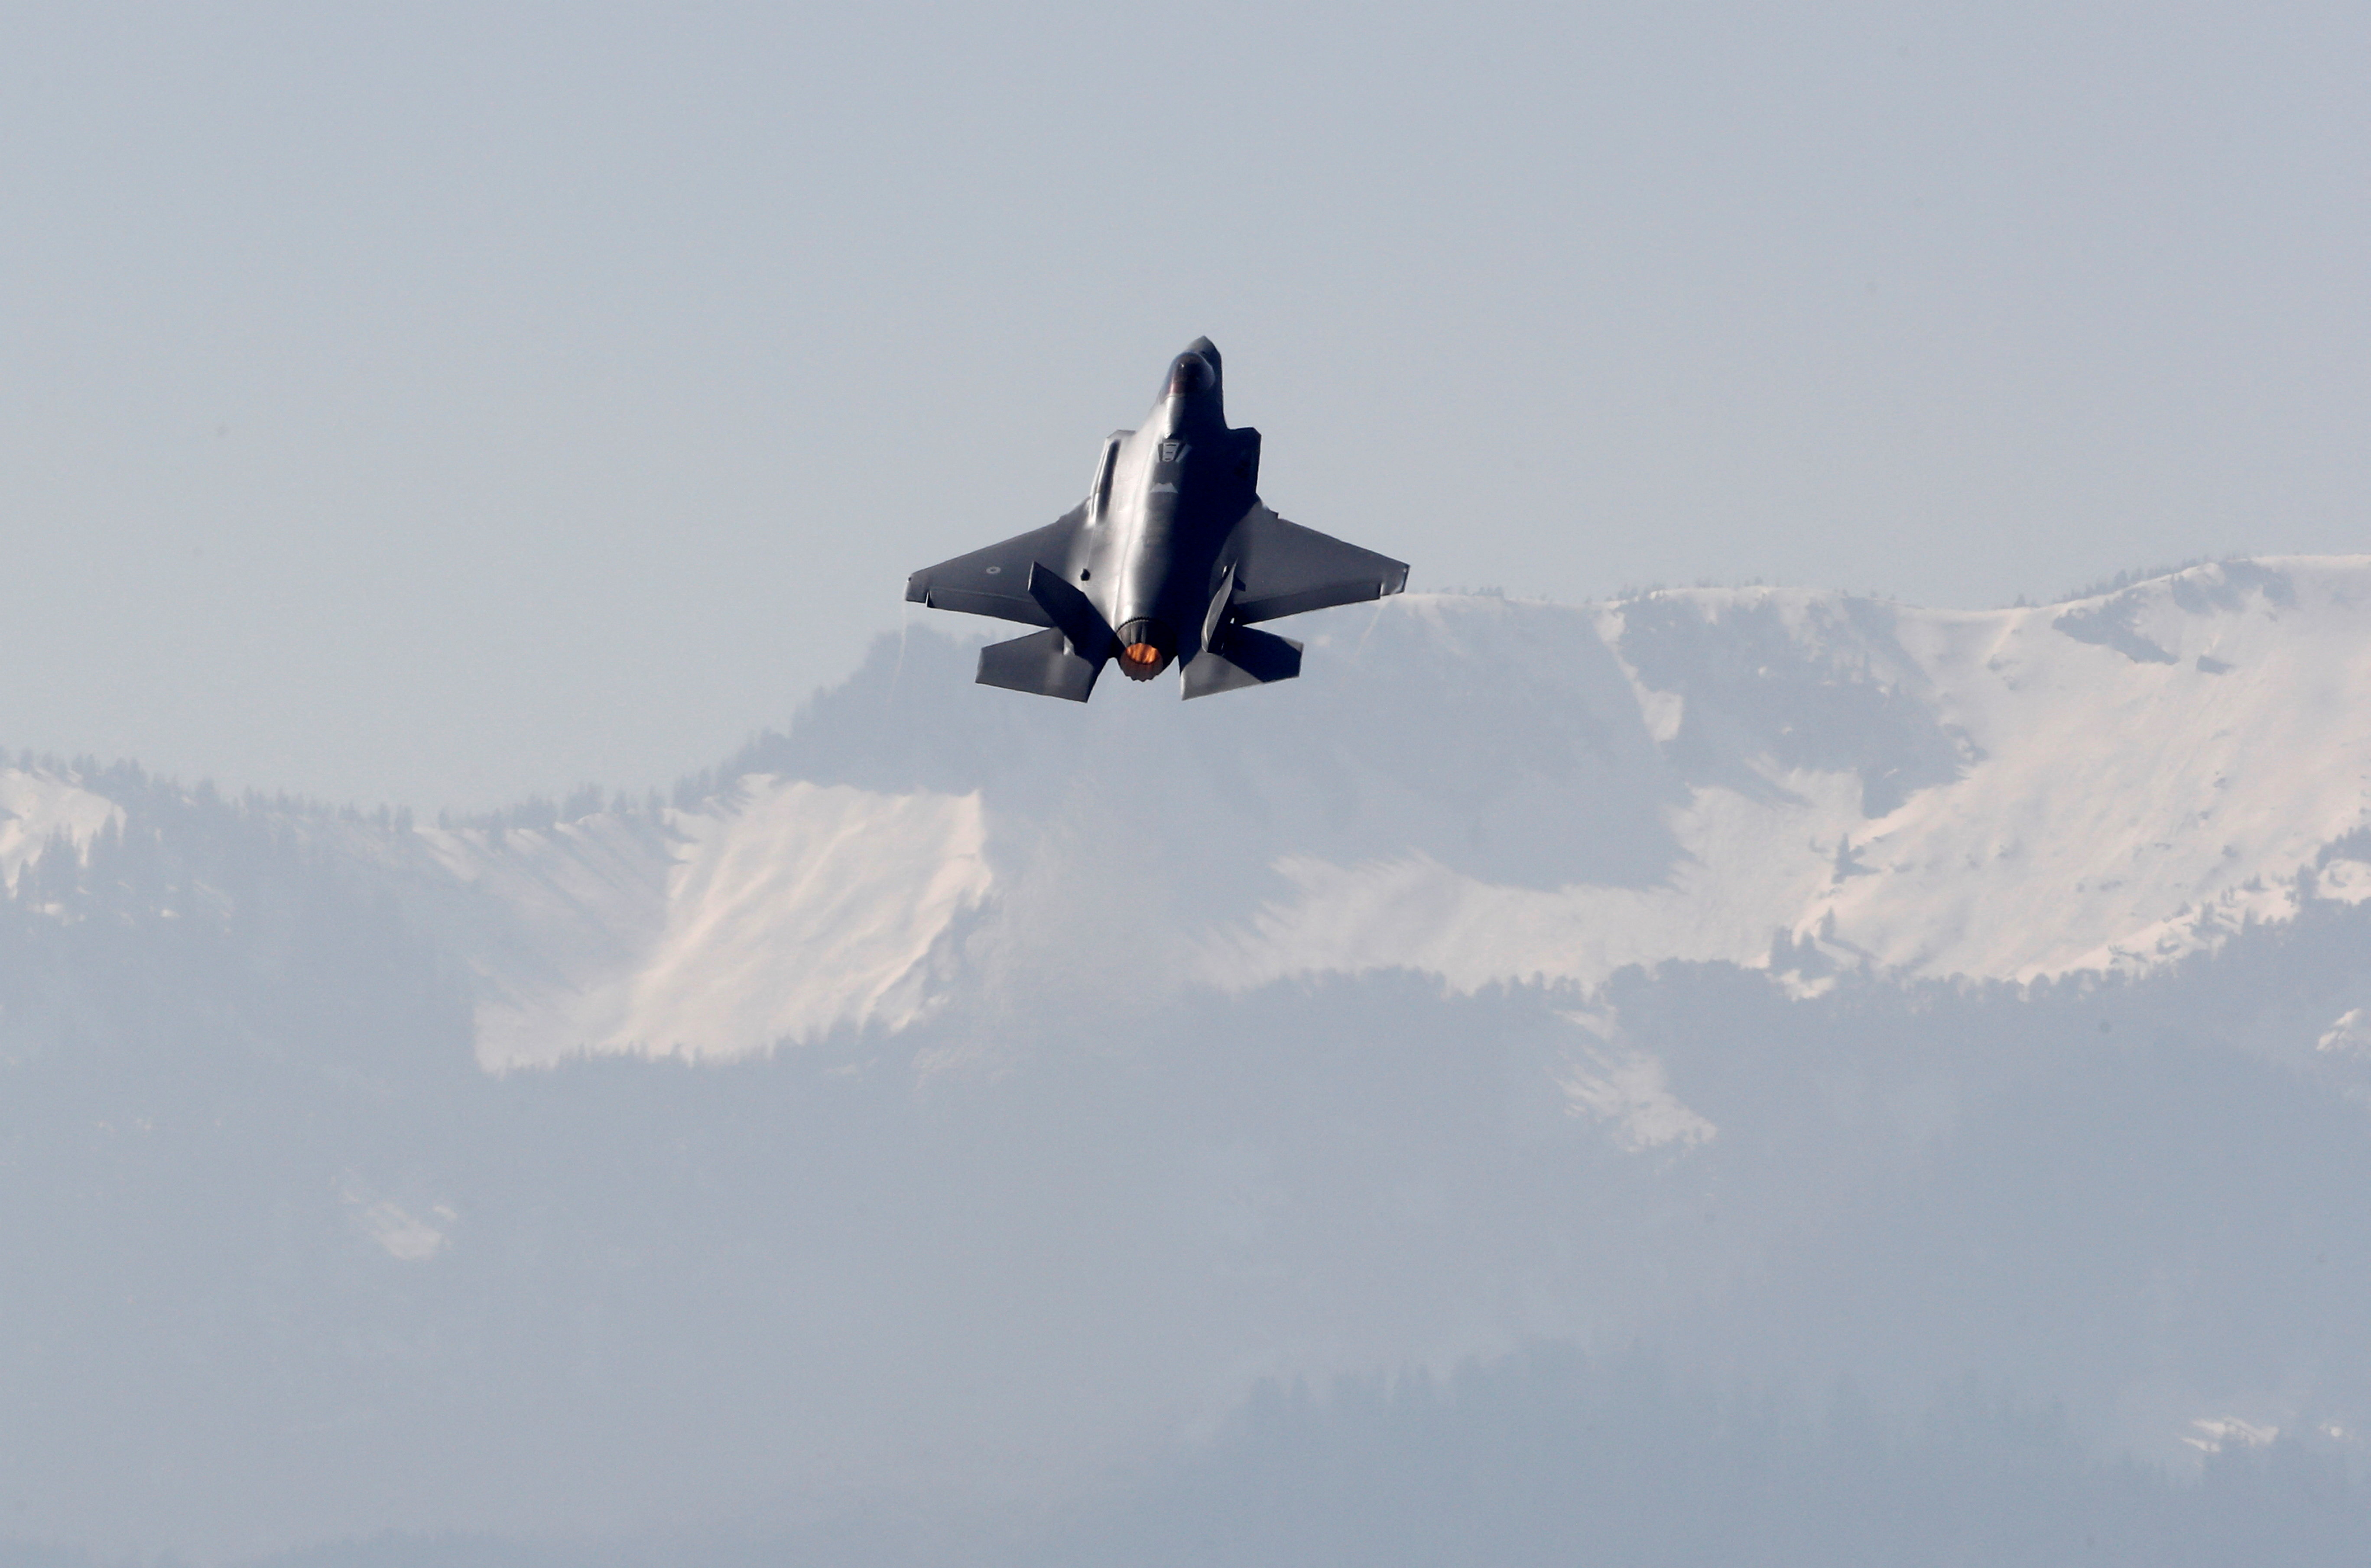 A F-35A fighter aircraft takes-off at the Swiss Air Force base in Emmen